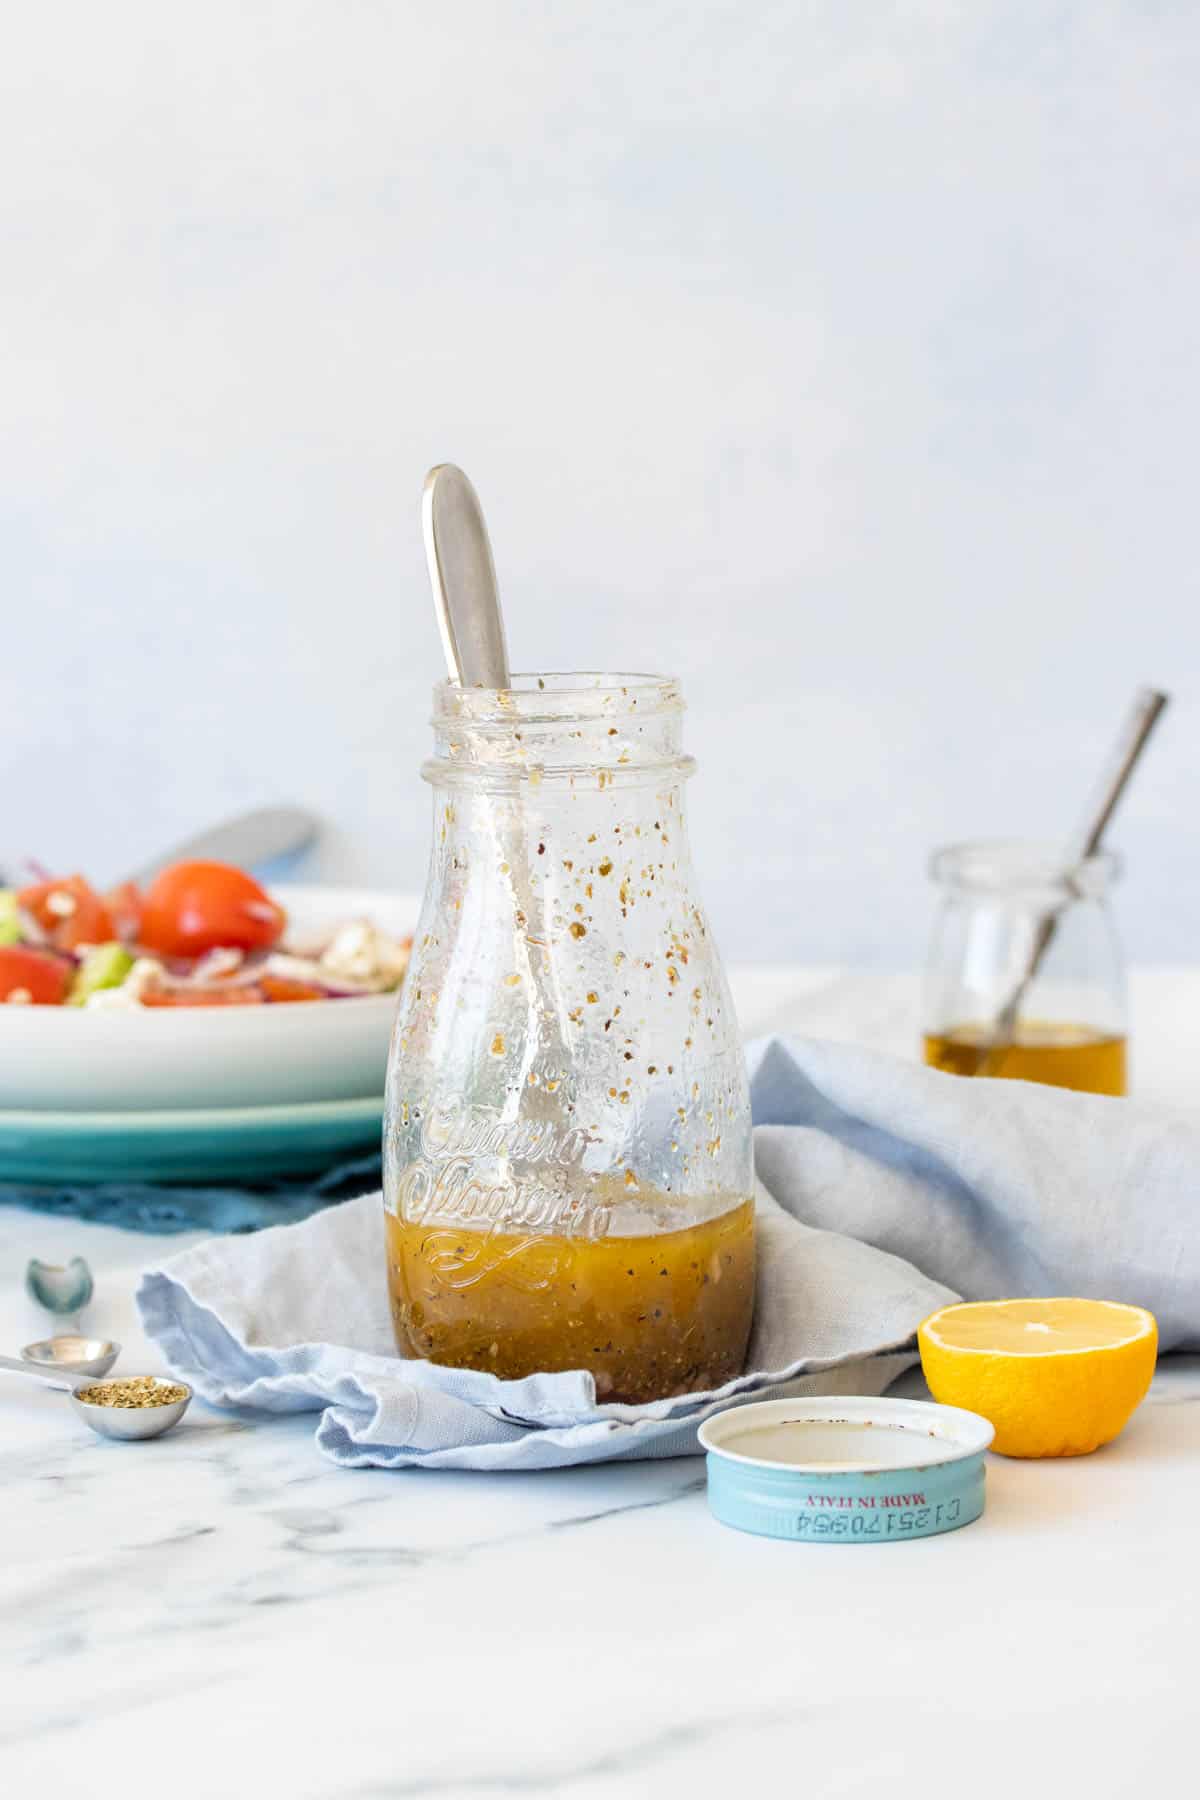 A glass jar on a light blue towel on a marble surface that is partially filled with an olive oil and vinegar based dressing